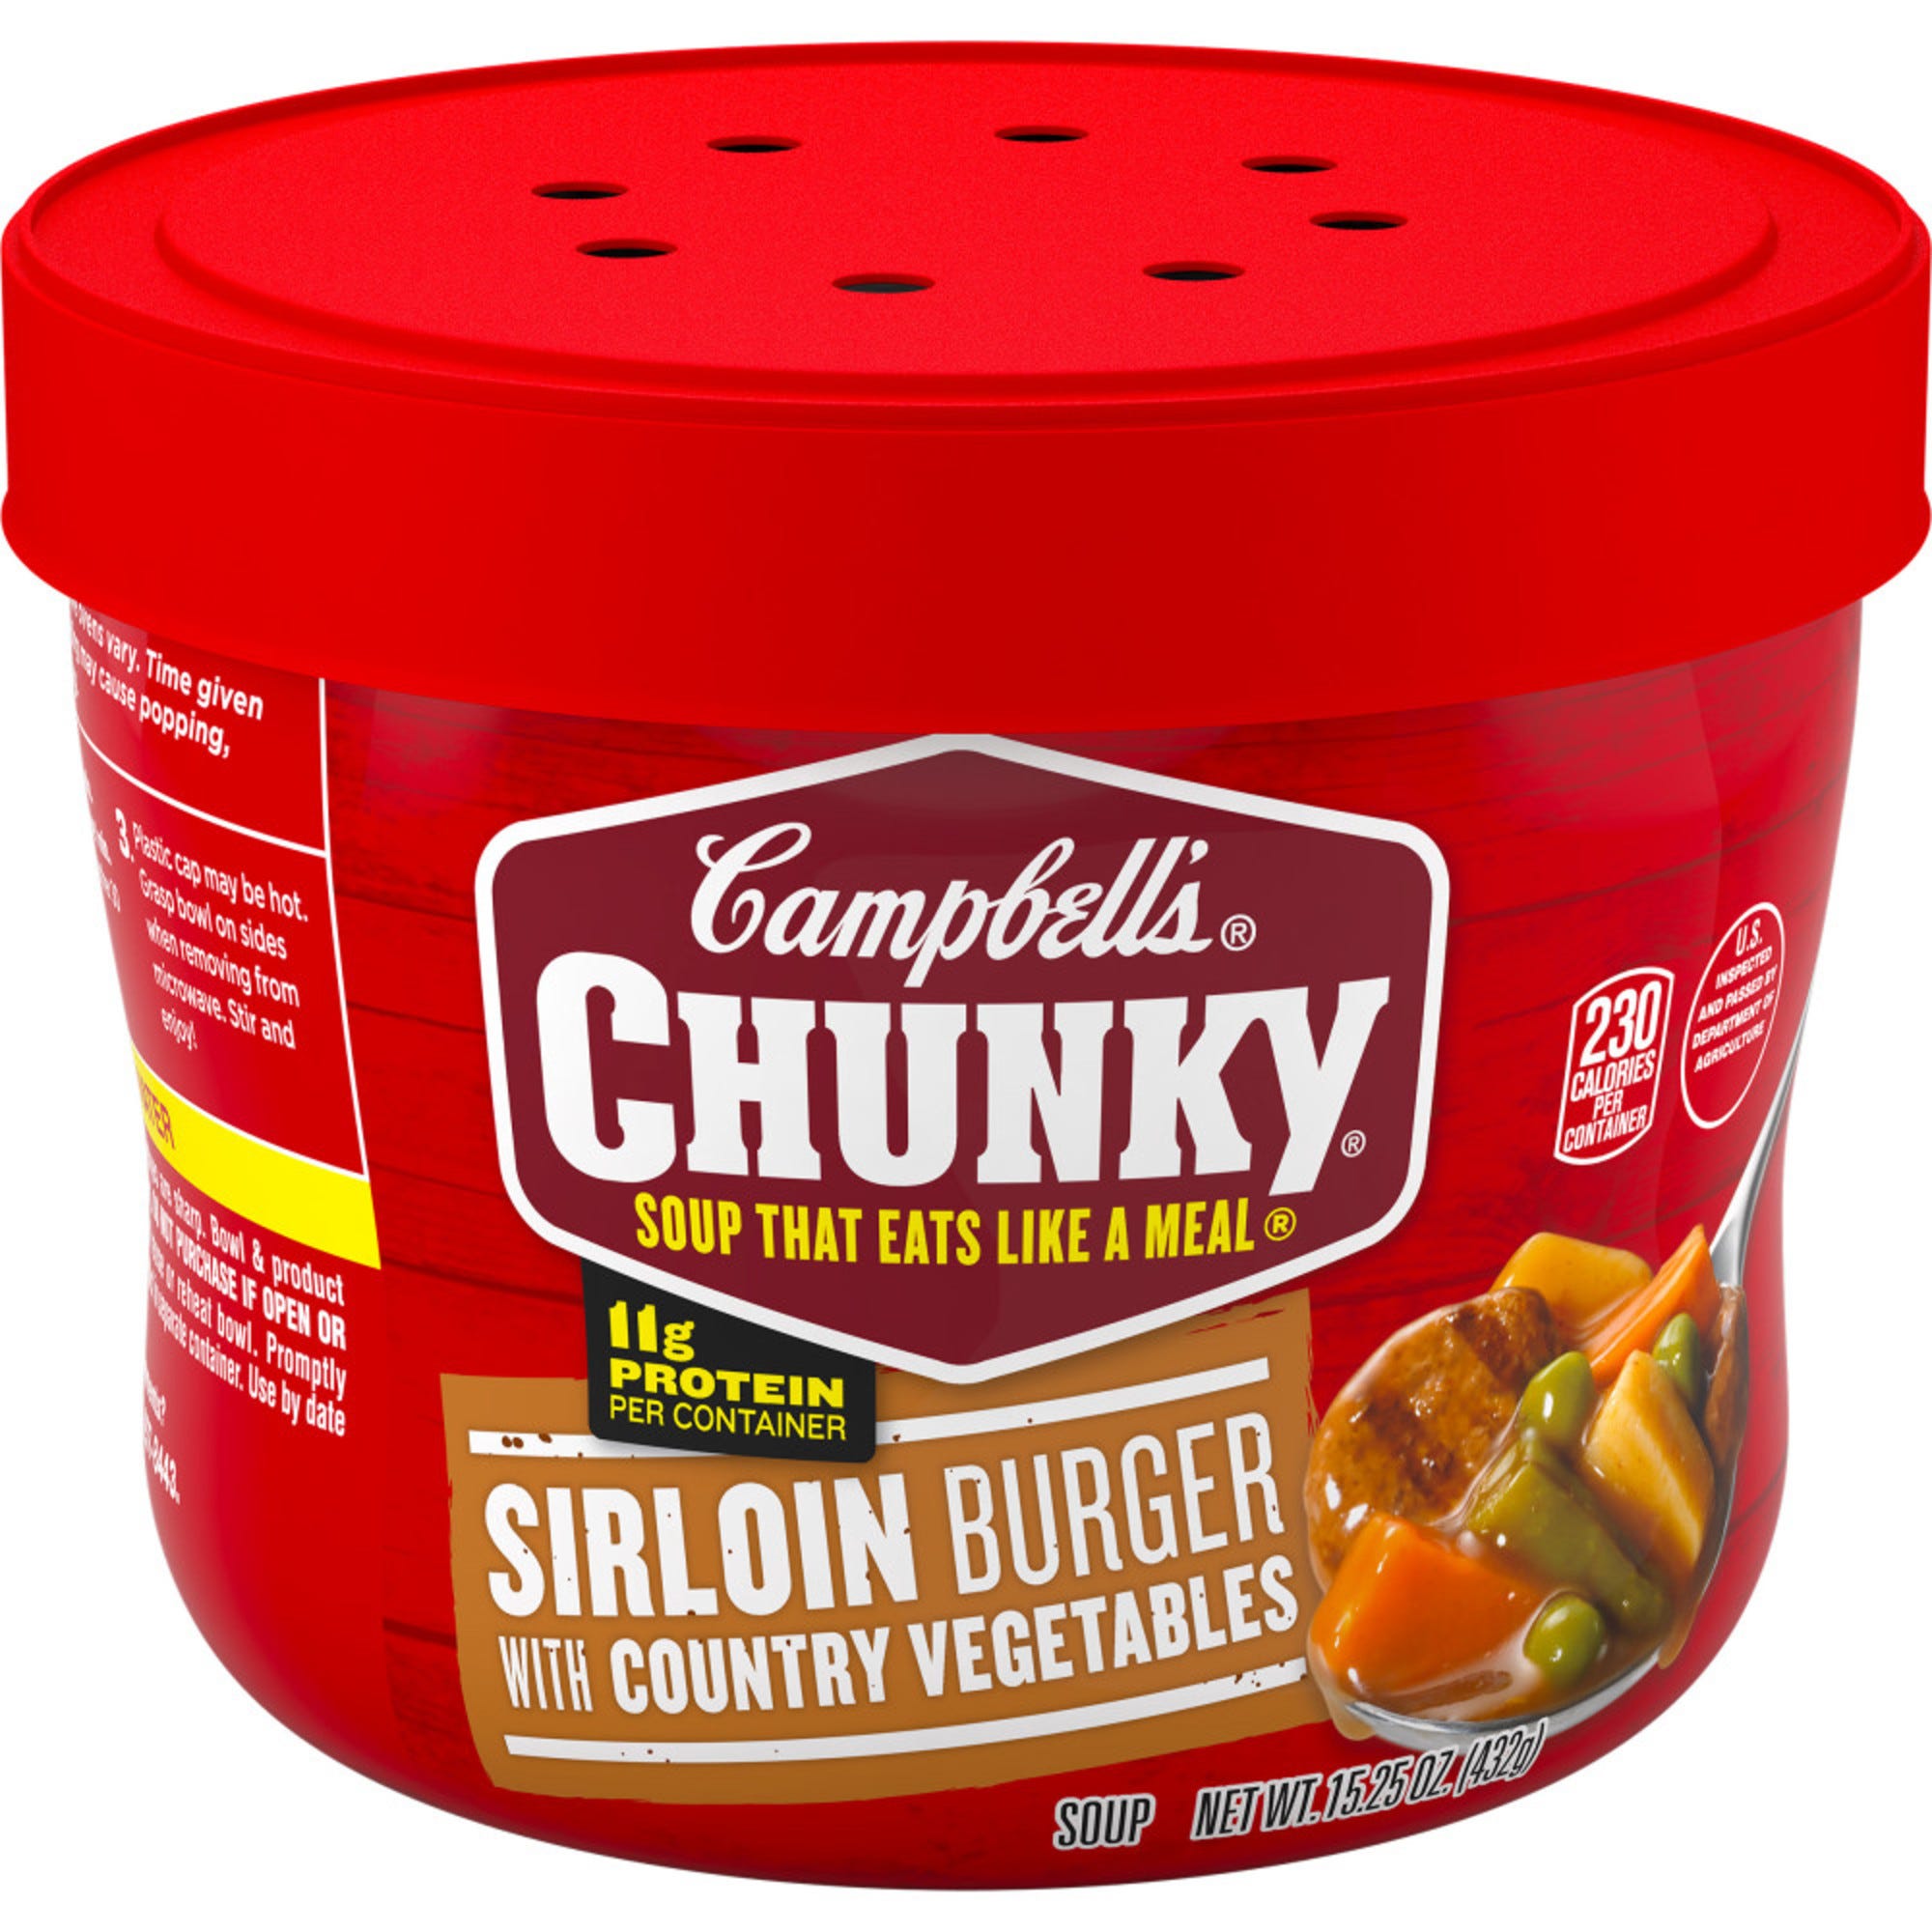 Campbells Chunky Soup, Sirloin Burger with Country Vegetables - 15.25 oz